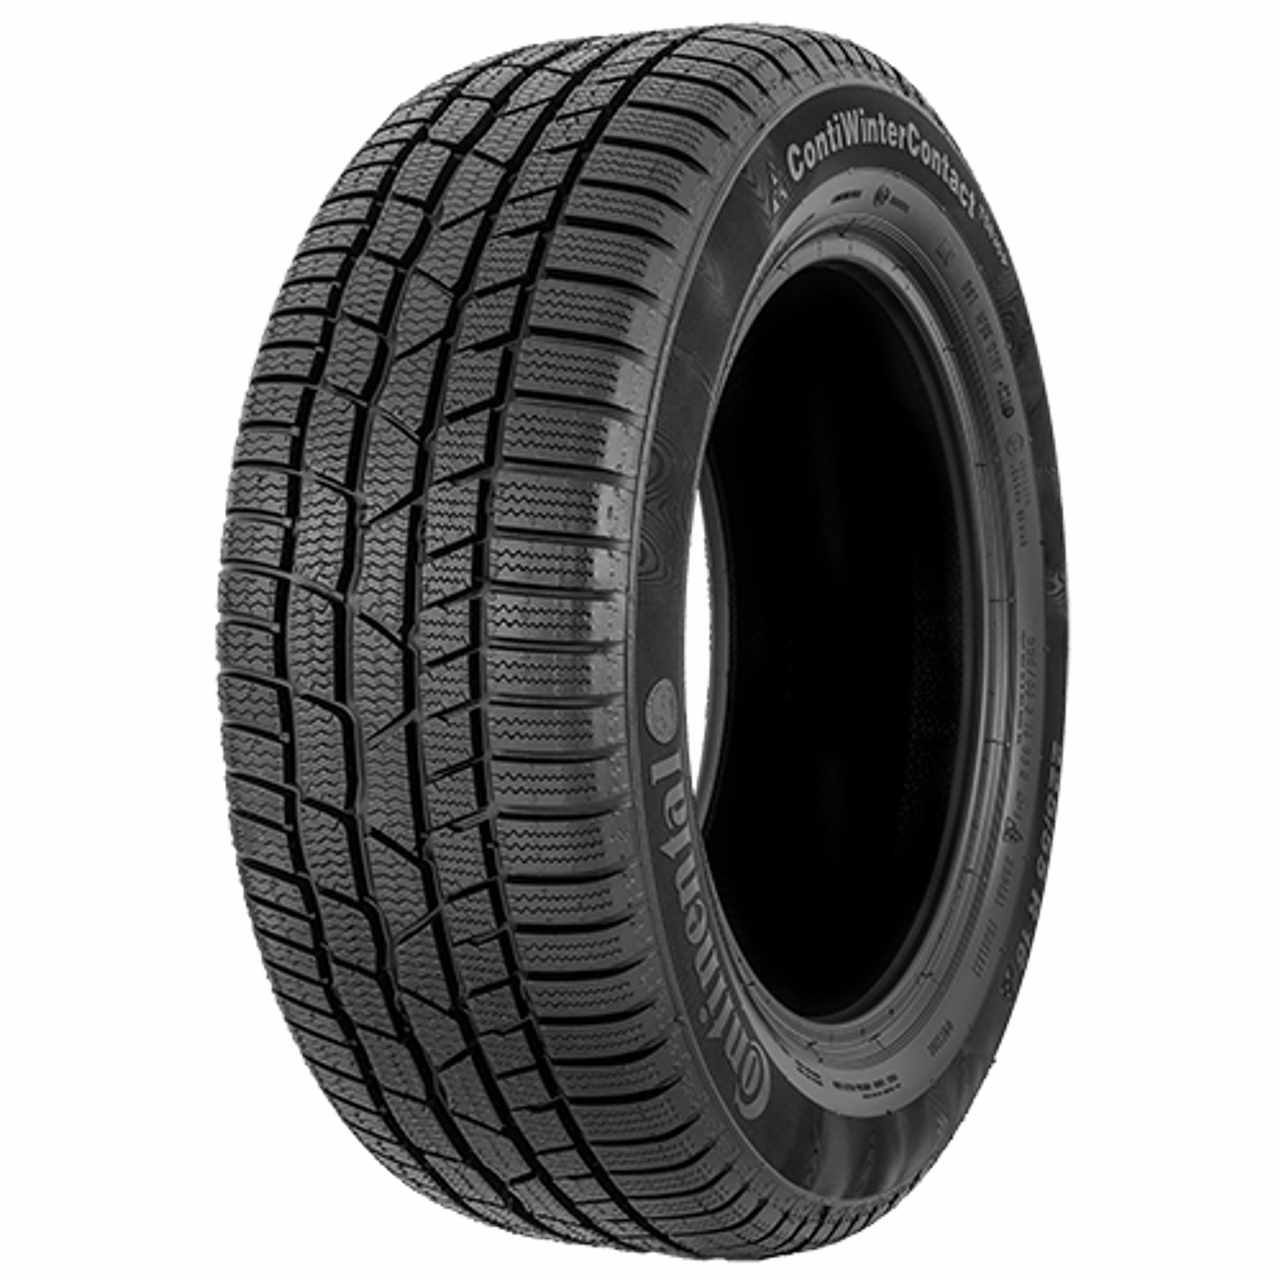 CONTINENTAL CONTIWINTERCONTACT TS 830 P 215/60R16 99H